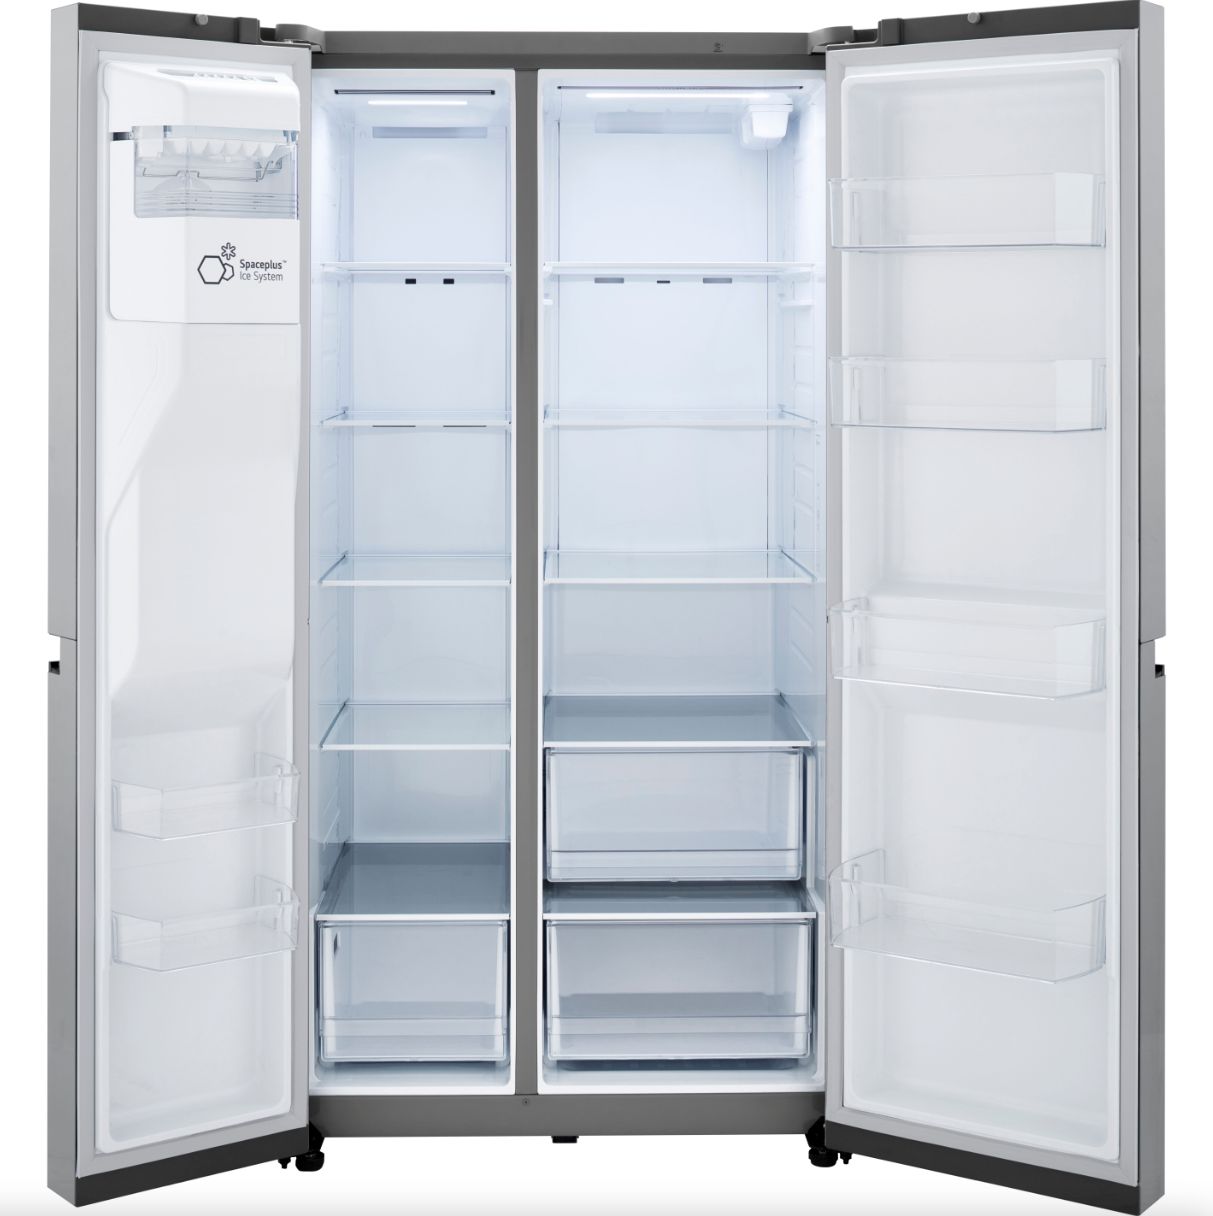 LG 36 Inch Side-by-Side Counter-Depth Refrigerator in Stainless Steel 23 Cu. Ft. (LRSXC2306S)